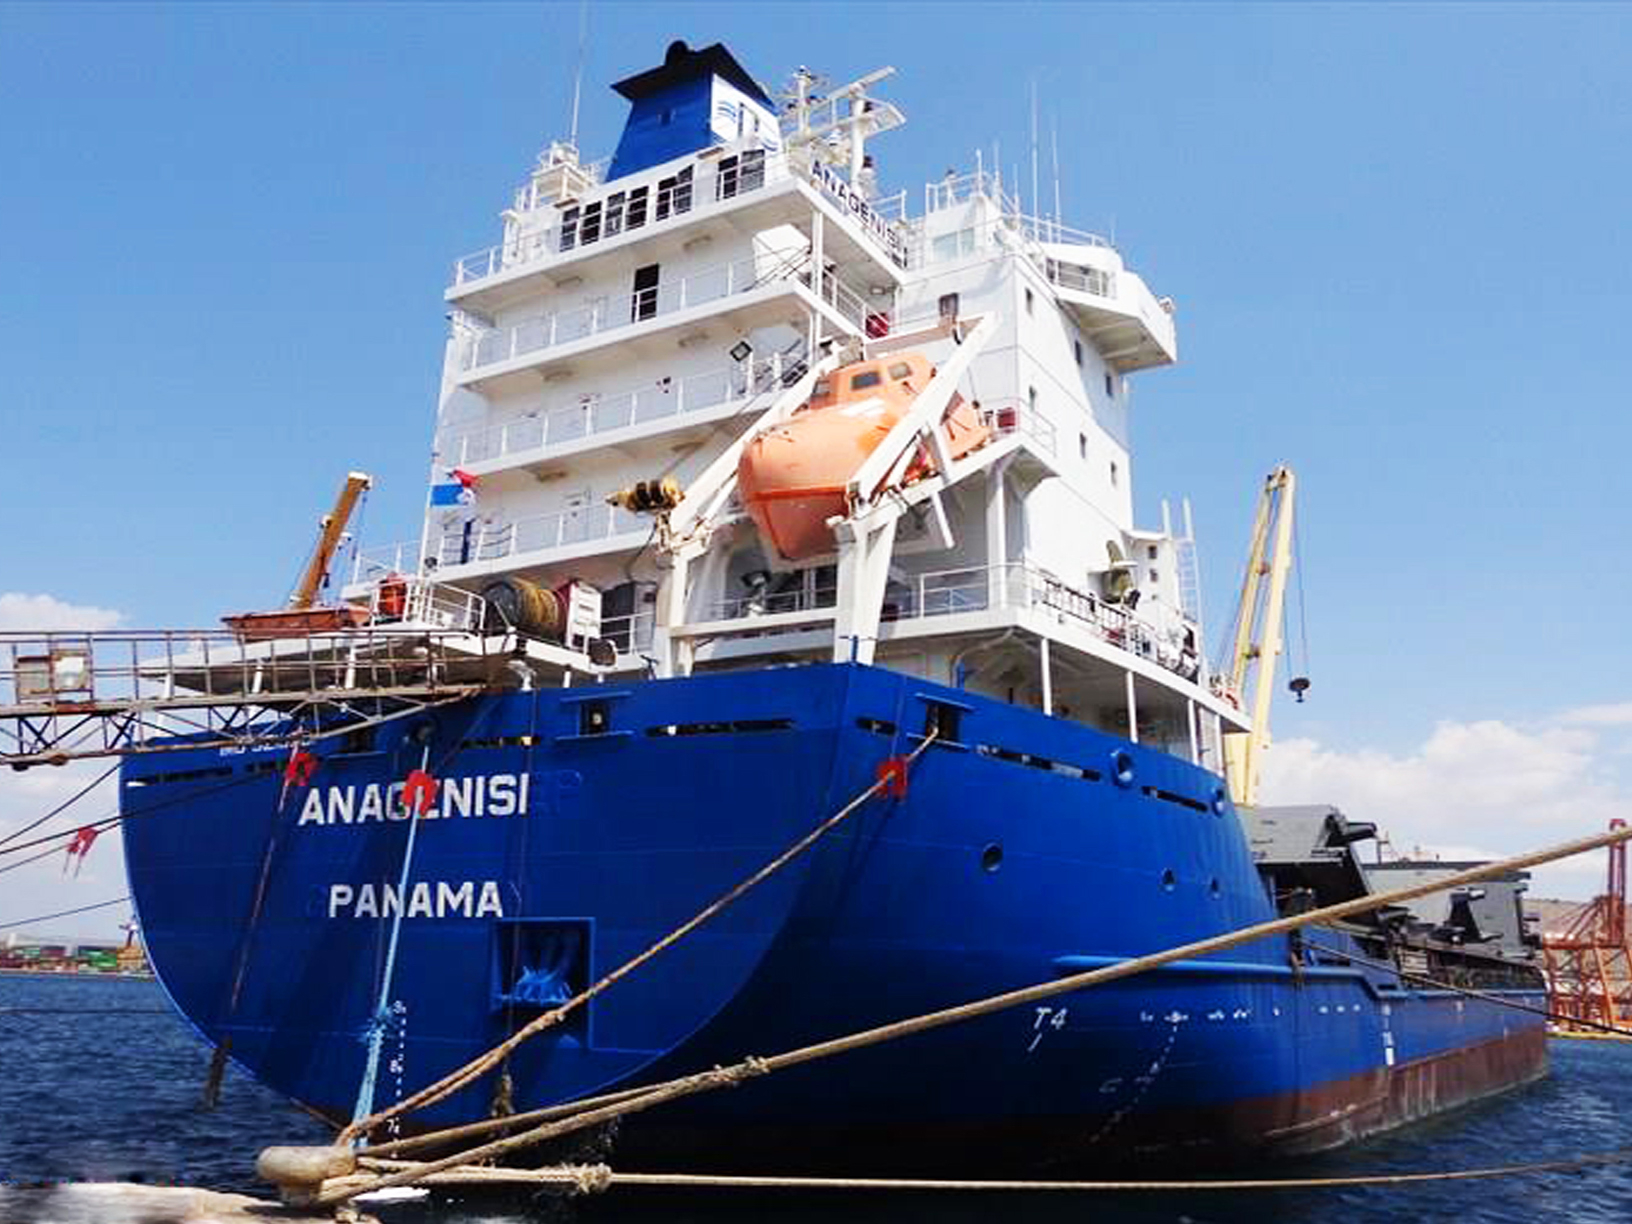 MV Anagenisi - Change of Owners